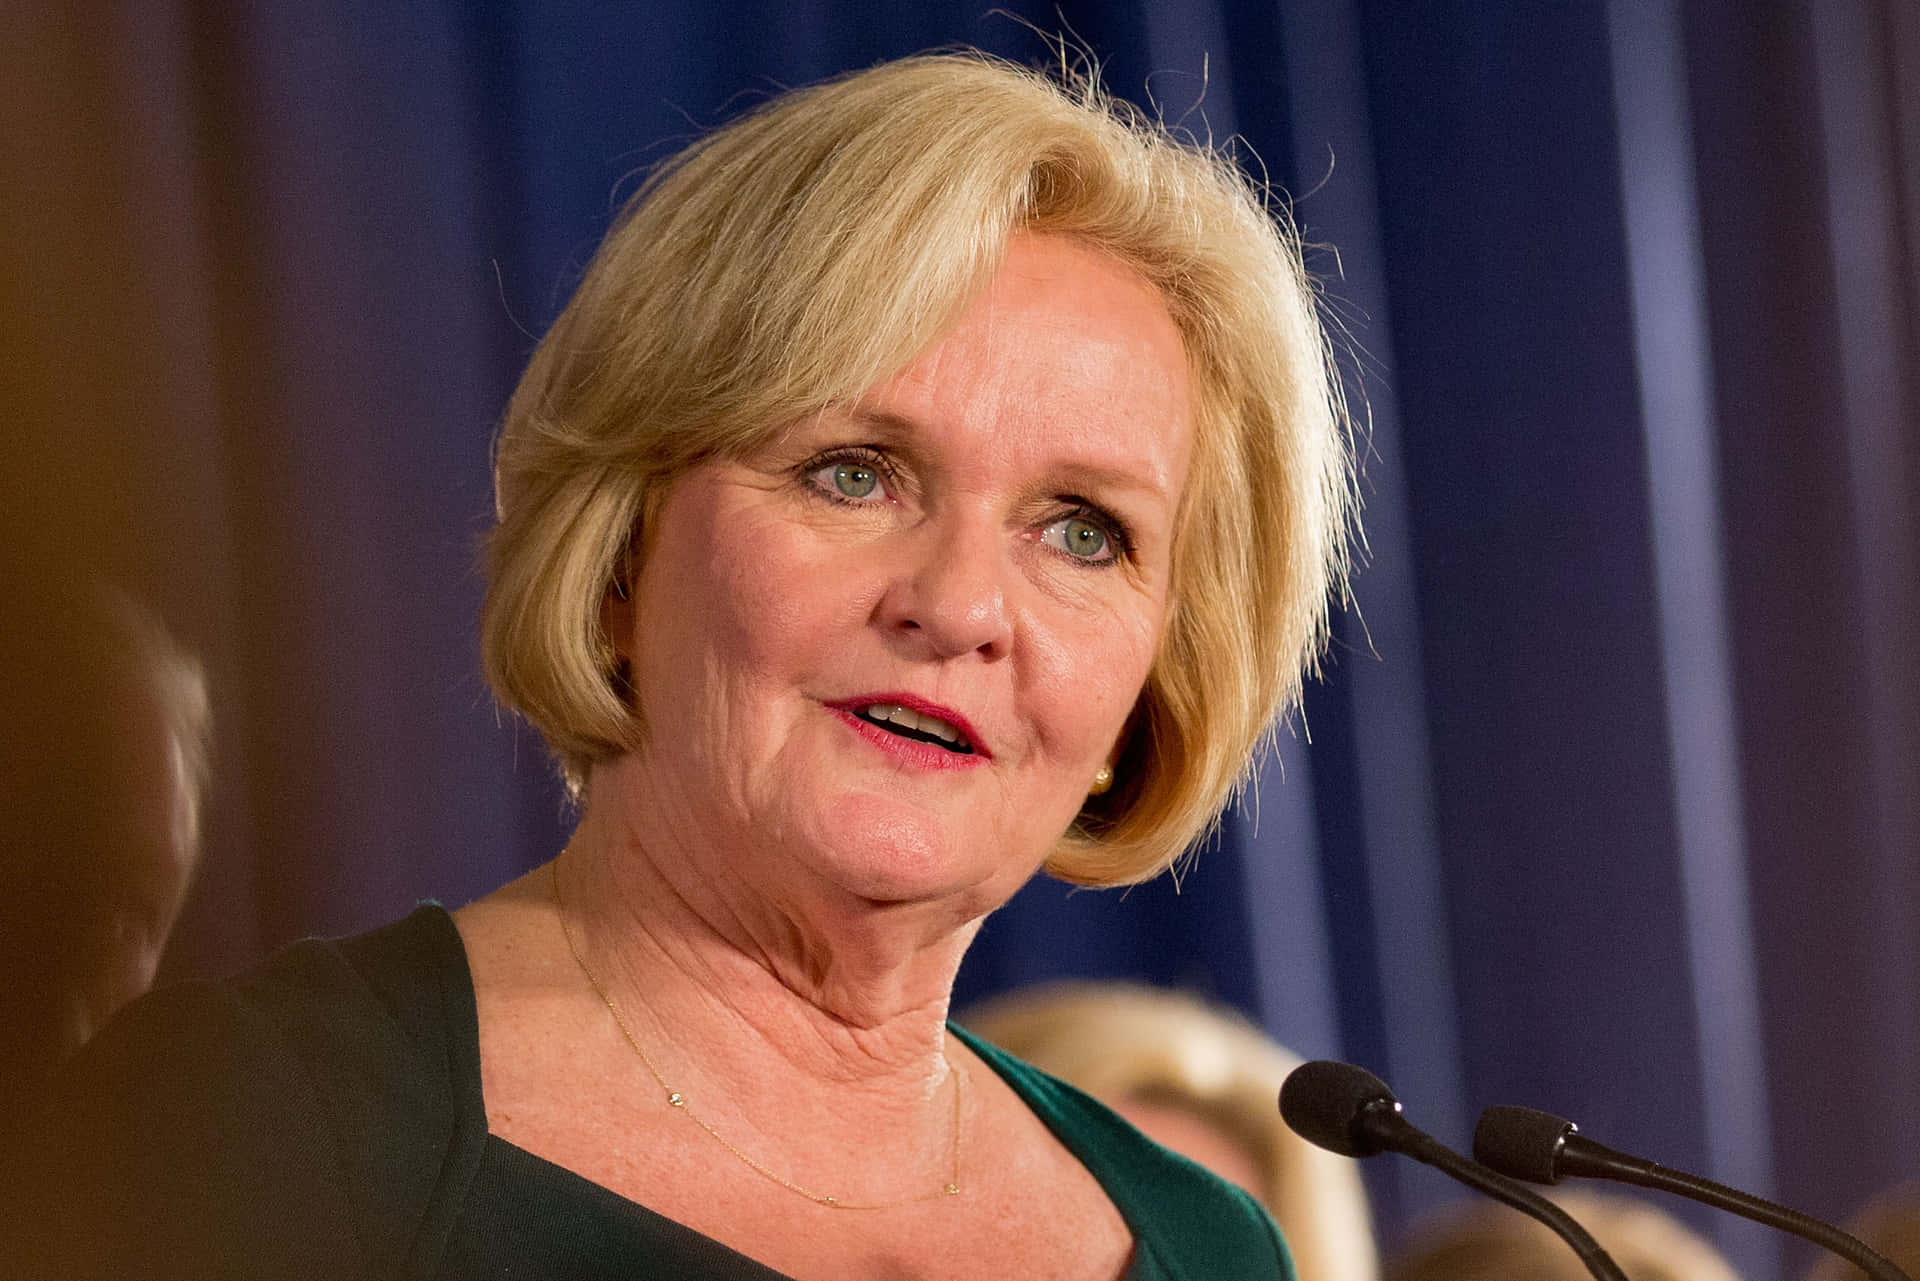 Claire Mccaskill In Teal Dress Background